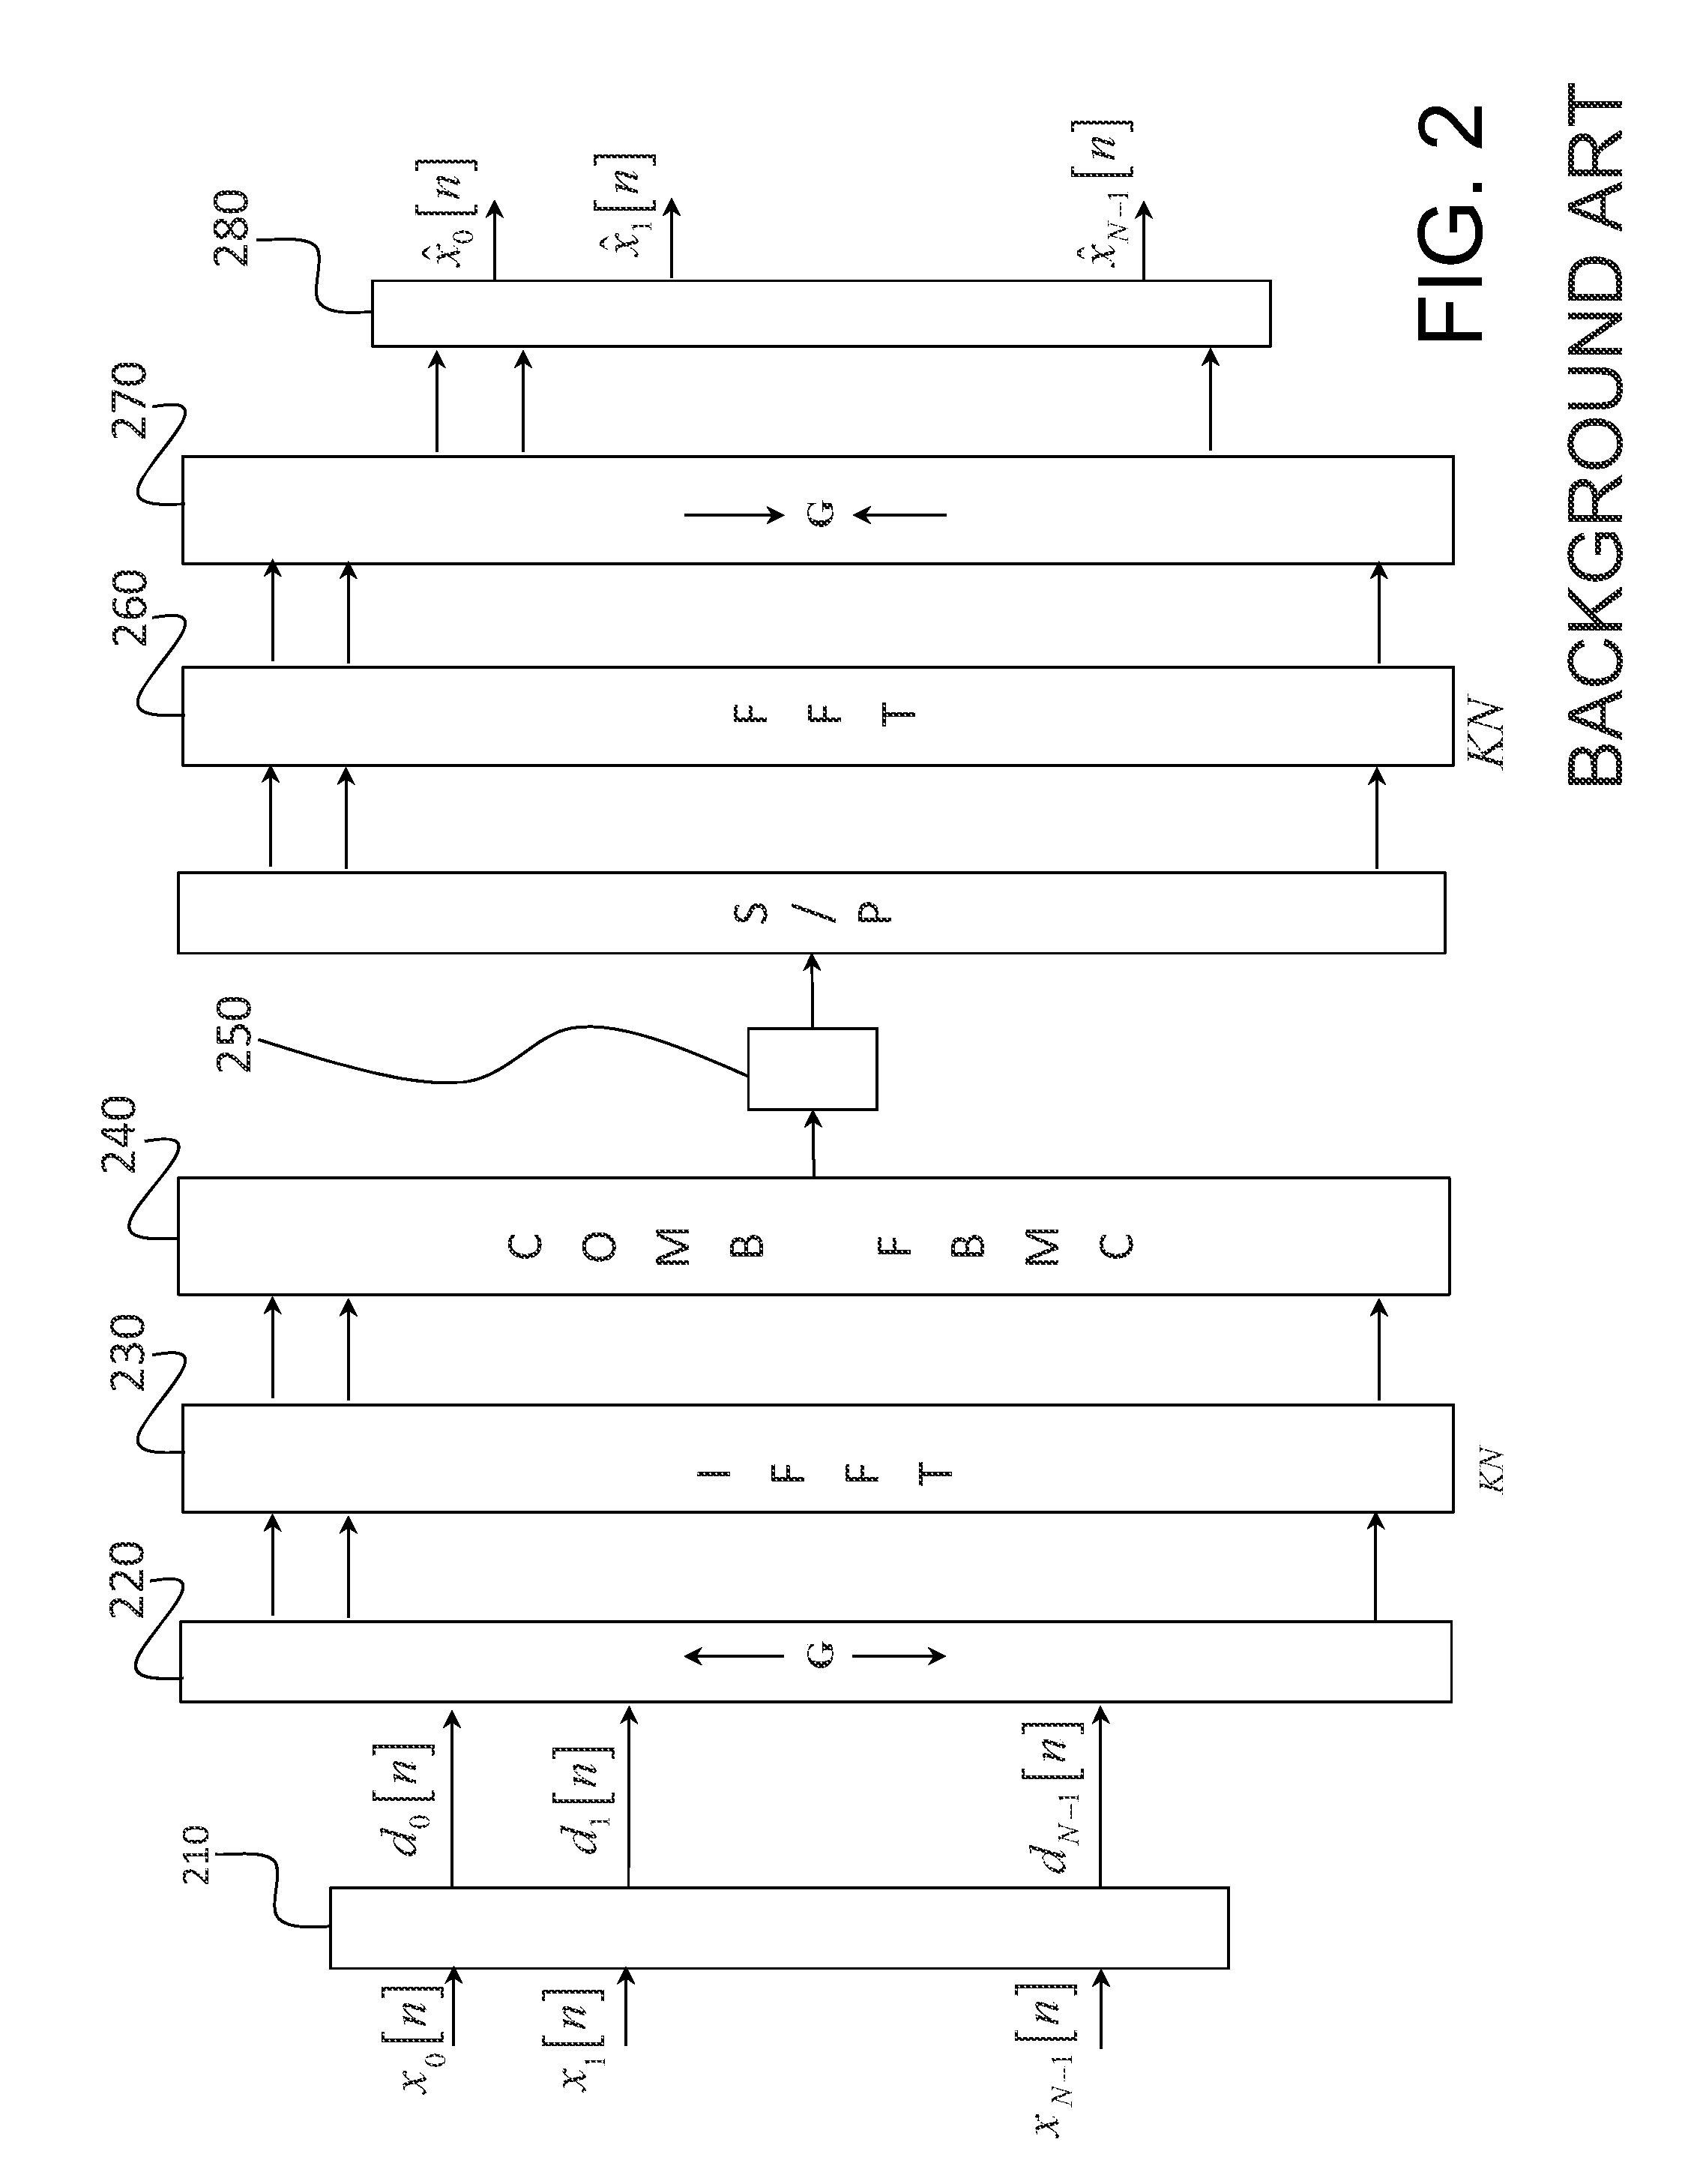 FBMC receiver with carrier frequency offset compensation